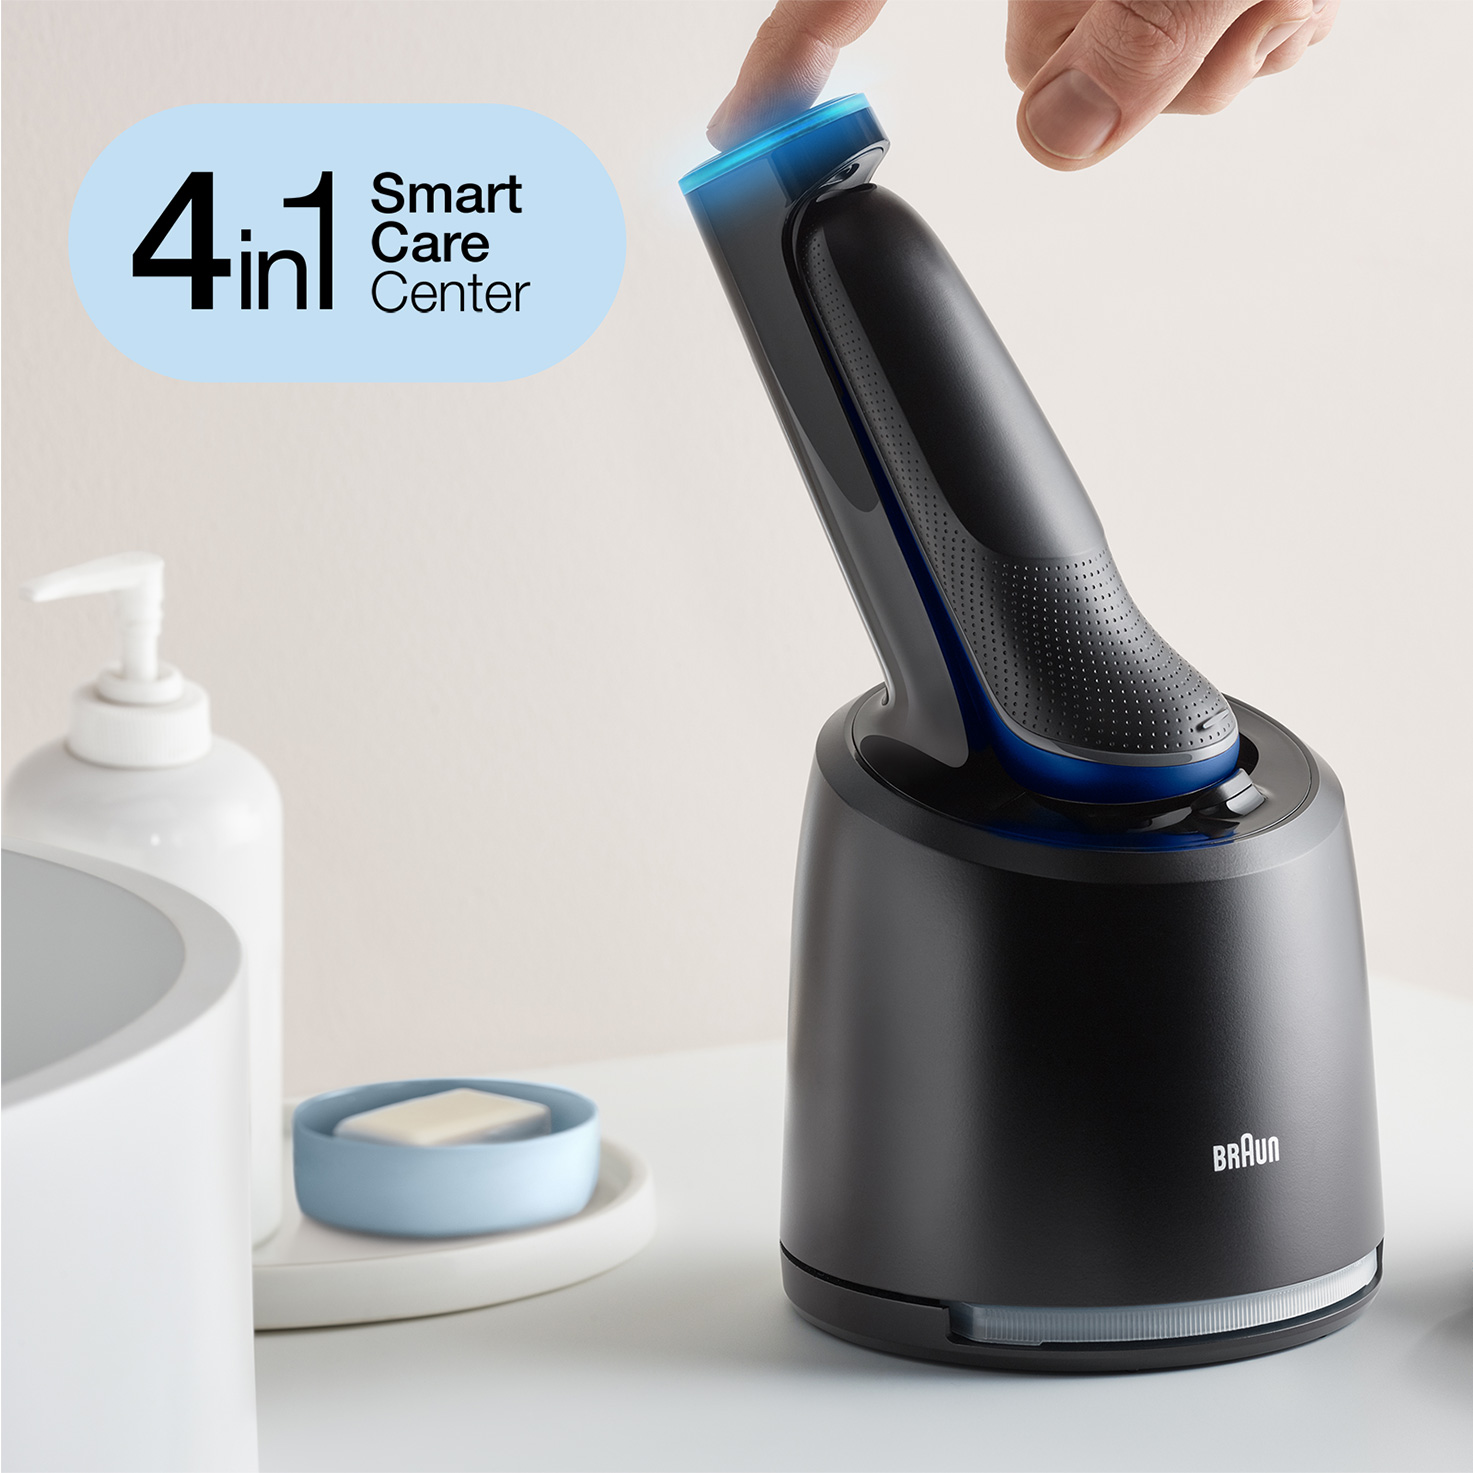 Series shaver 6 SmartCare 1 Wet with center and attachment, 61-B7200cc & Dry